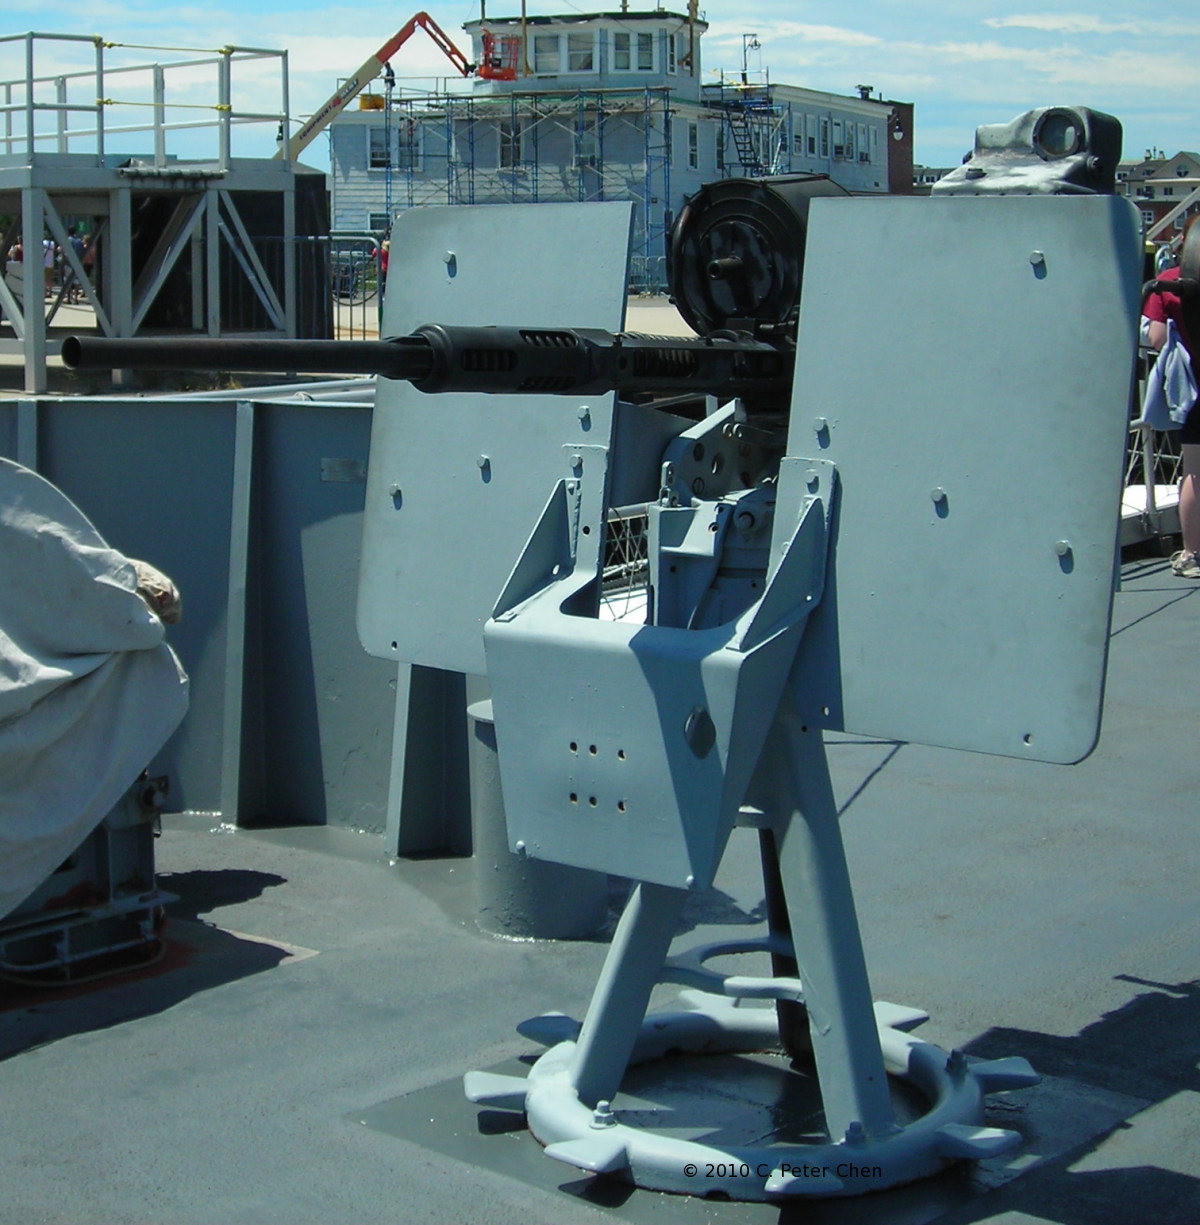 20 mm Oerlikon anti-aircraft gun mounted on the forward deck of museum ship USS Cassin Young, Boston, Massachusetts, United States, 4 Jul 2010